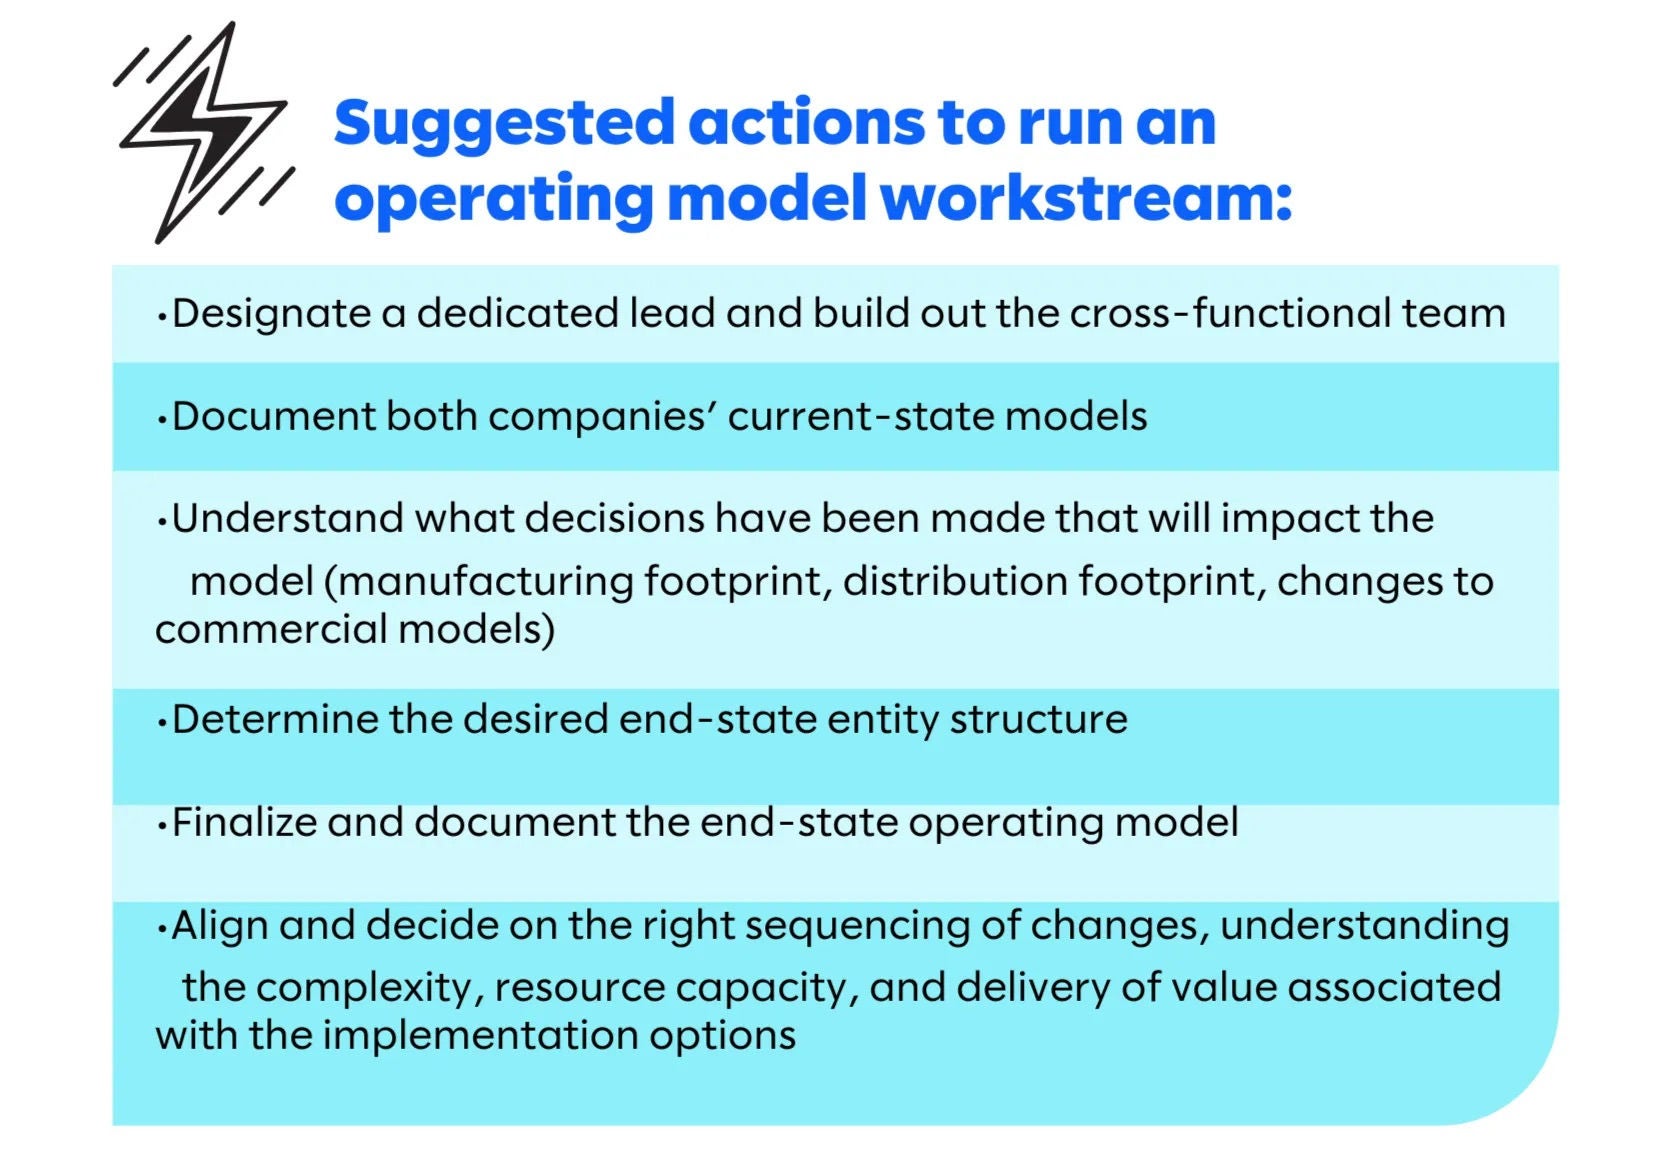 suggested actions model workstream